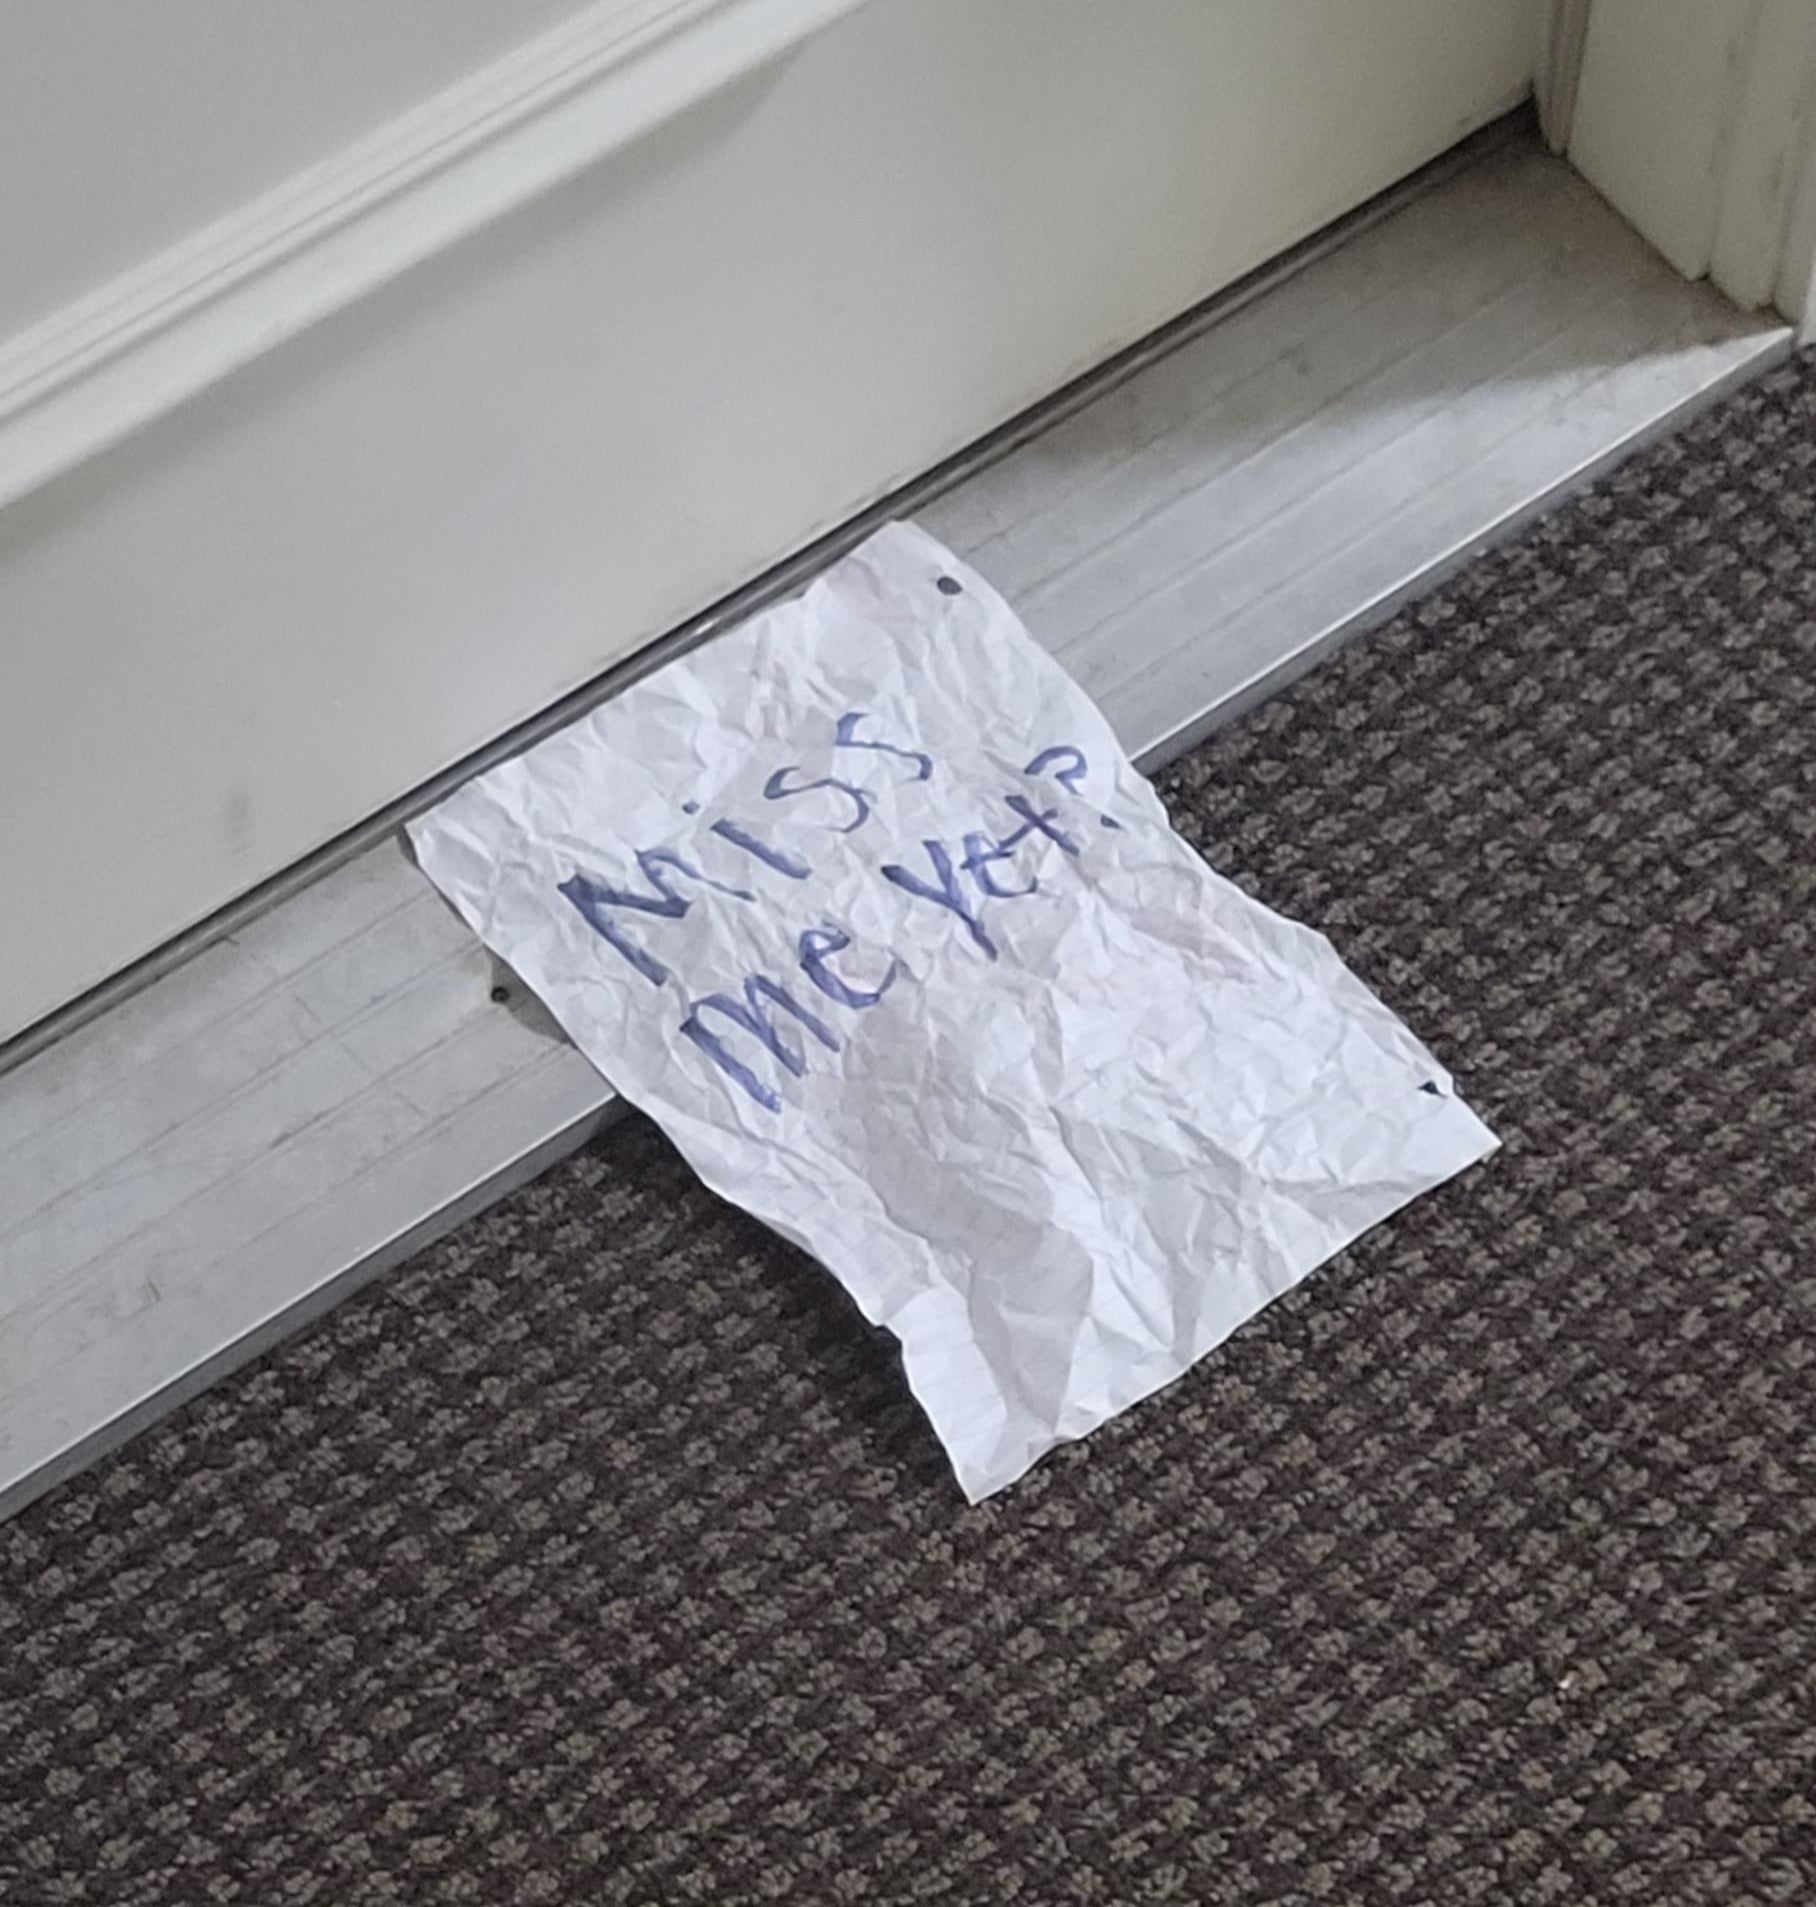 a crinkled up note that says miss me yet?